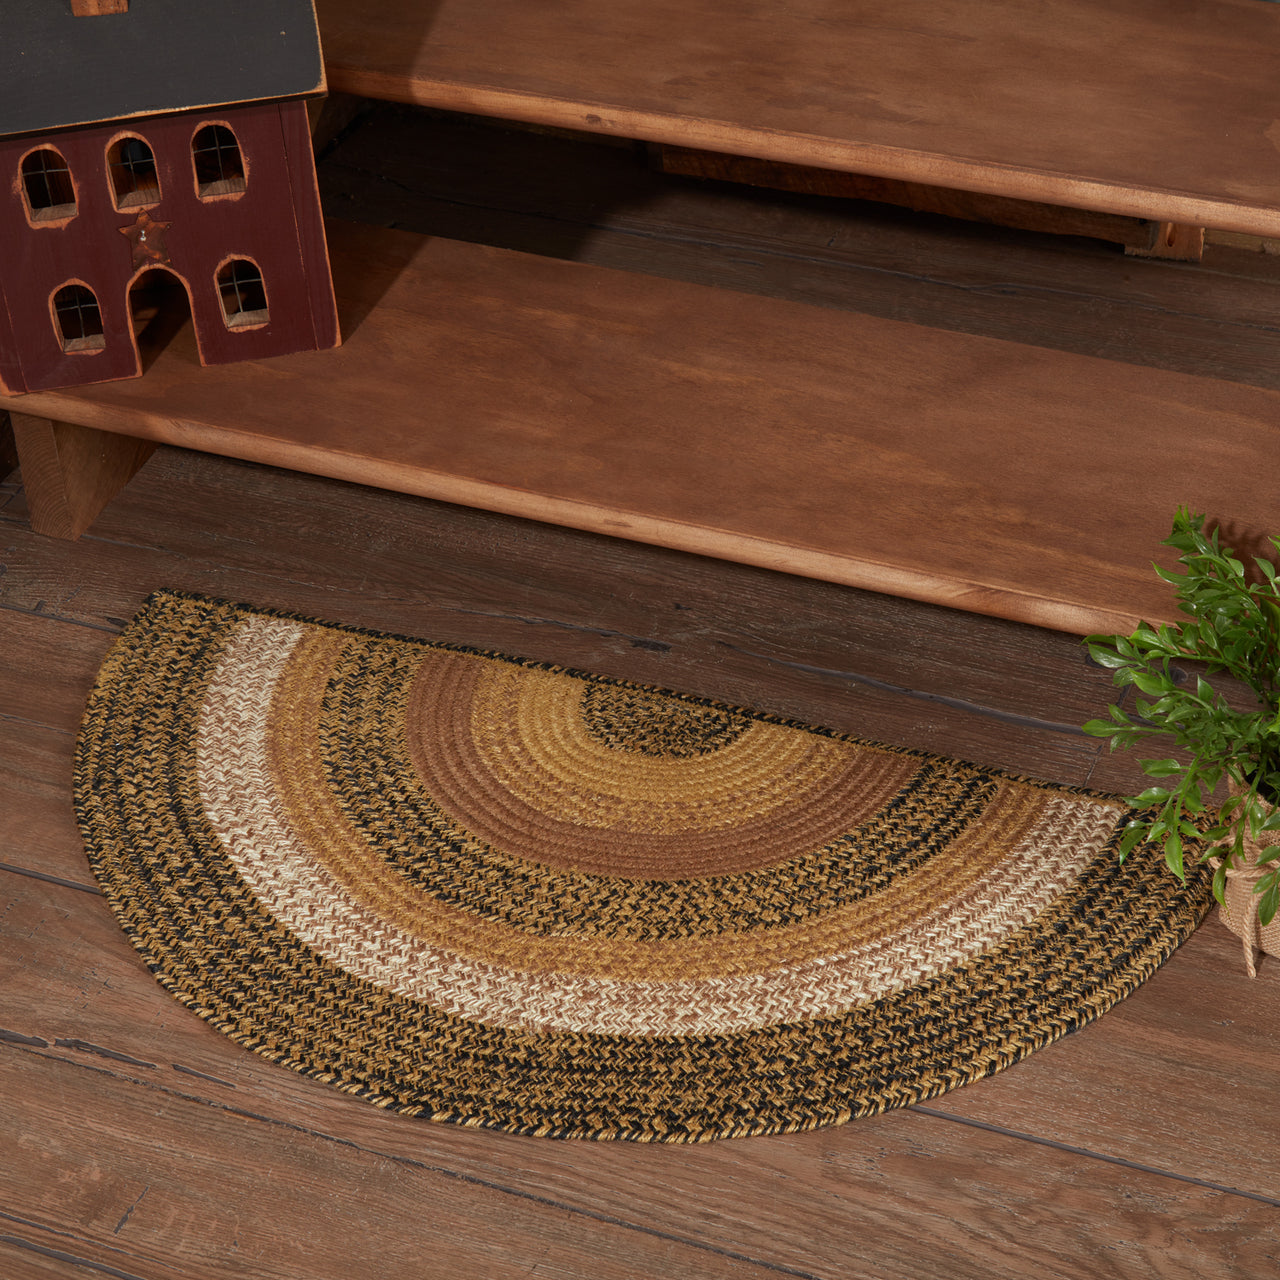 Kettle Grove Jute Braided Rug Half Circle 16.5"x33" with Rug Pad VHC Brands